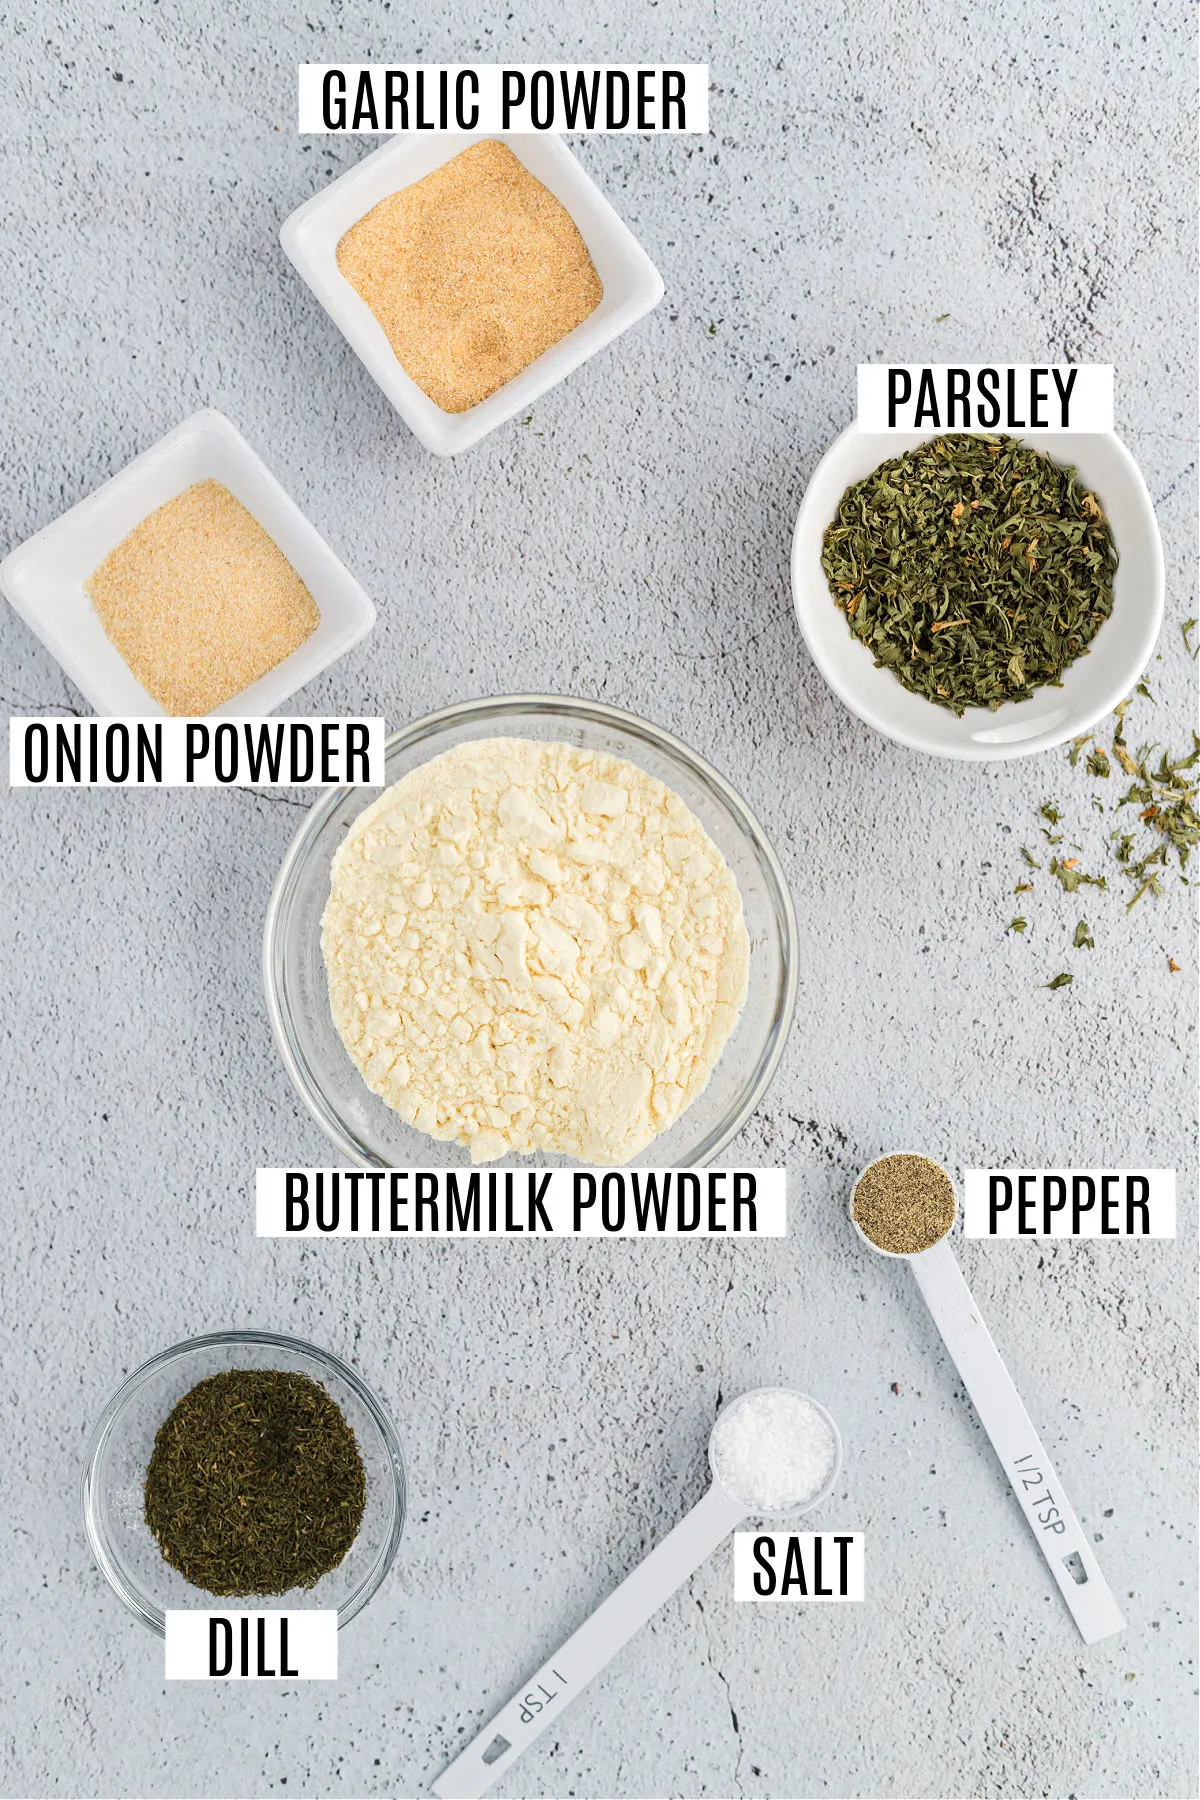 Ingredients needed to make homemade dry ranch seasoning mix.